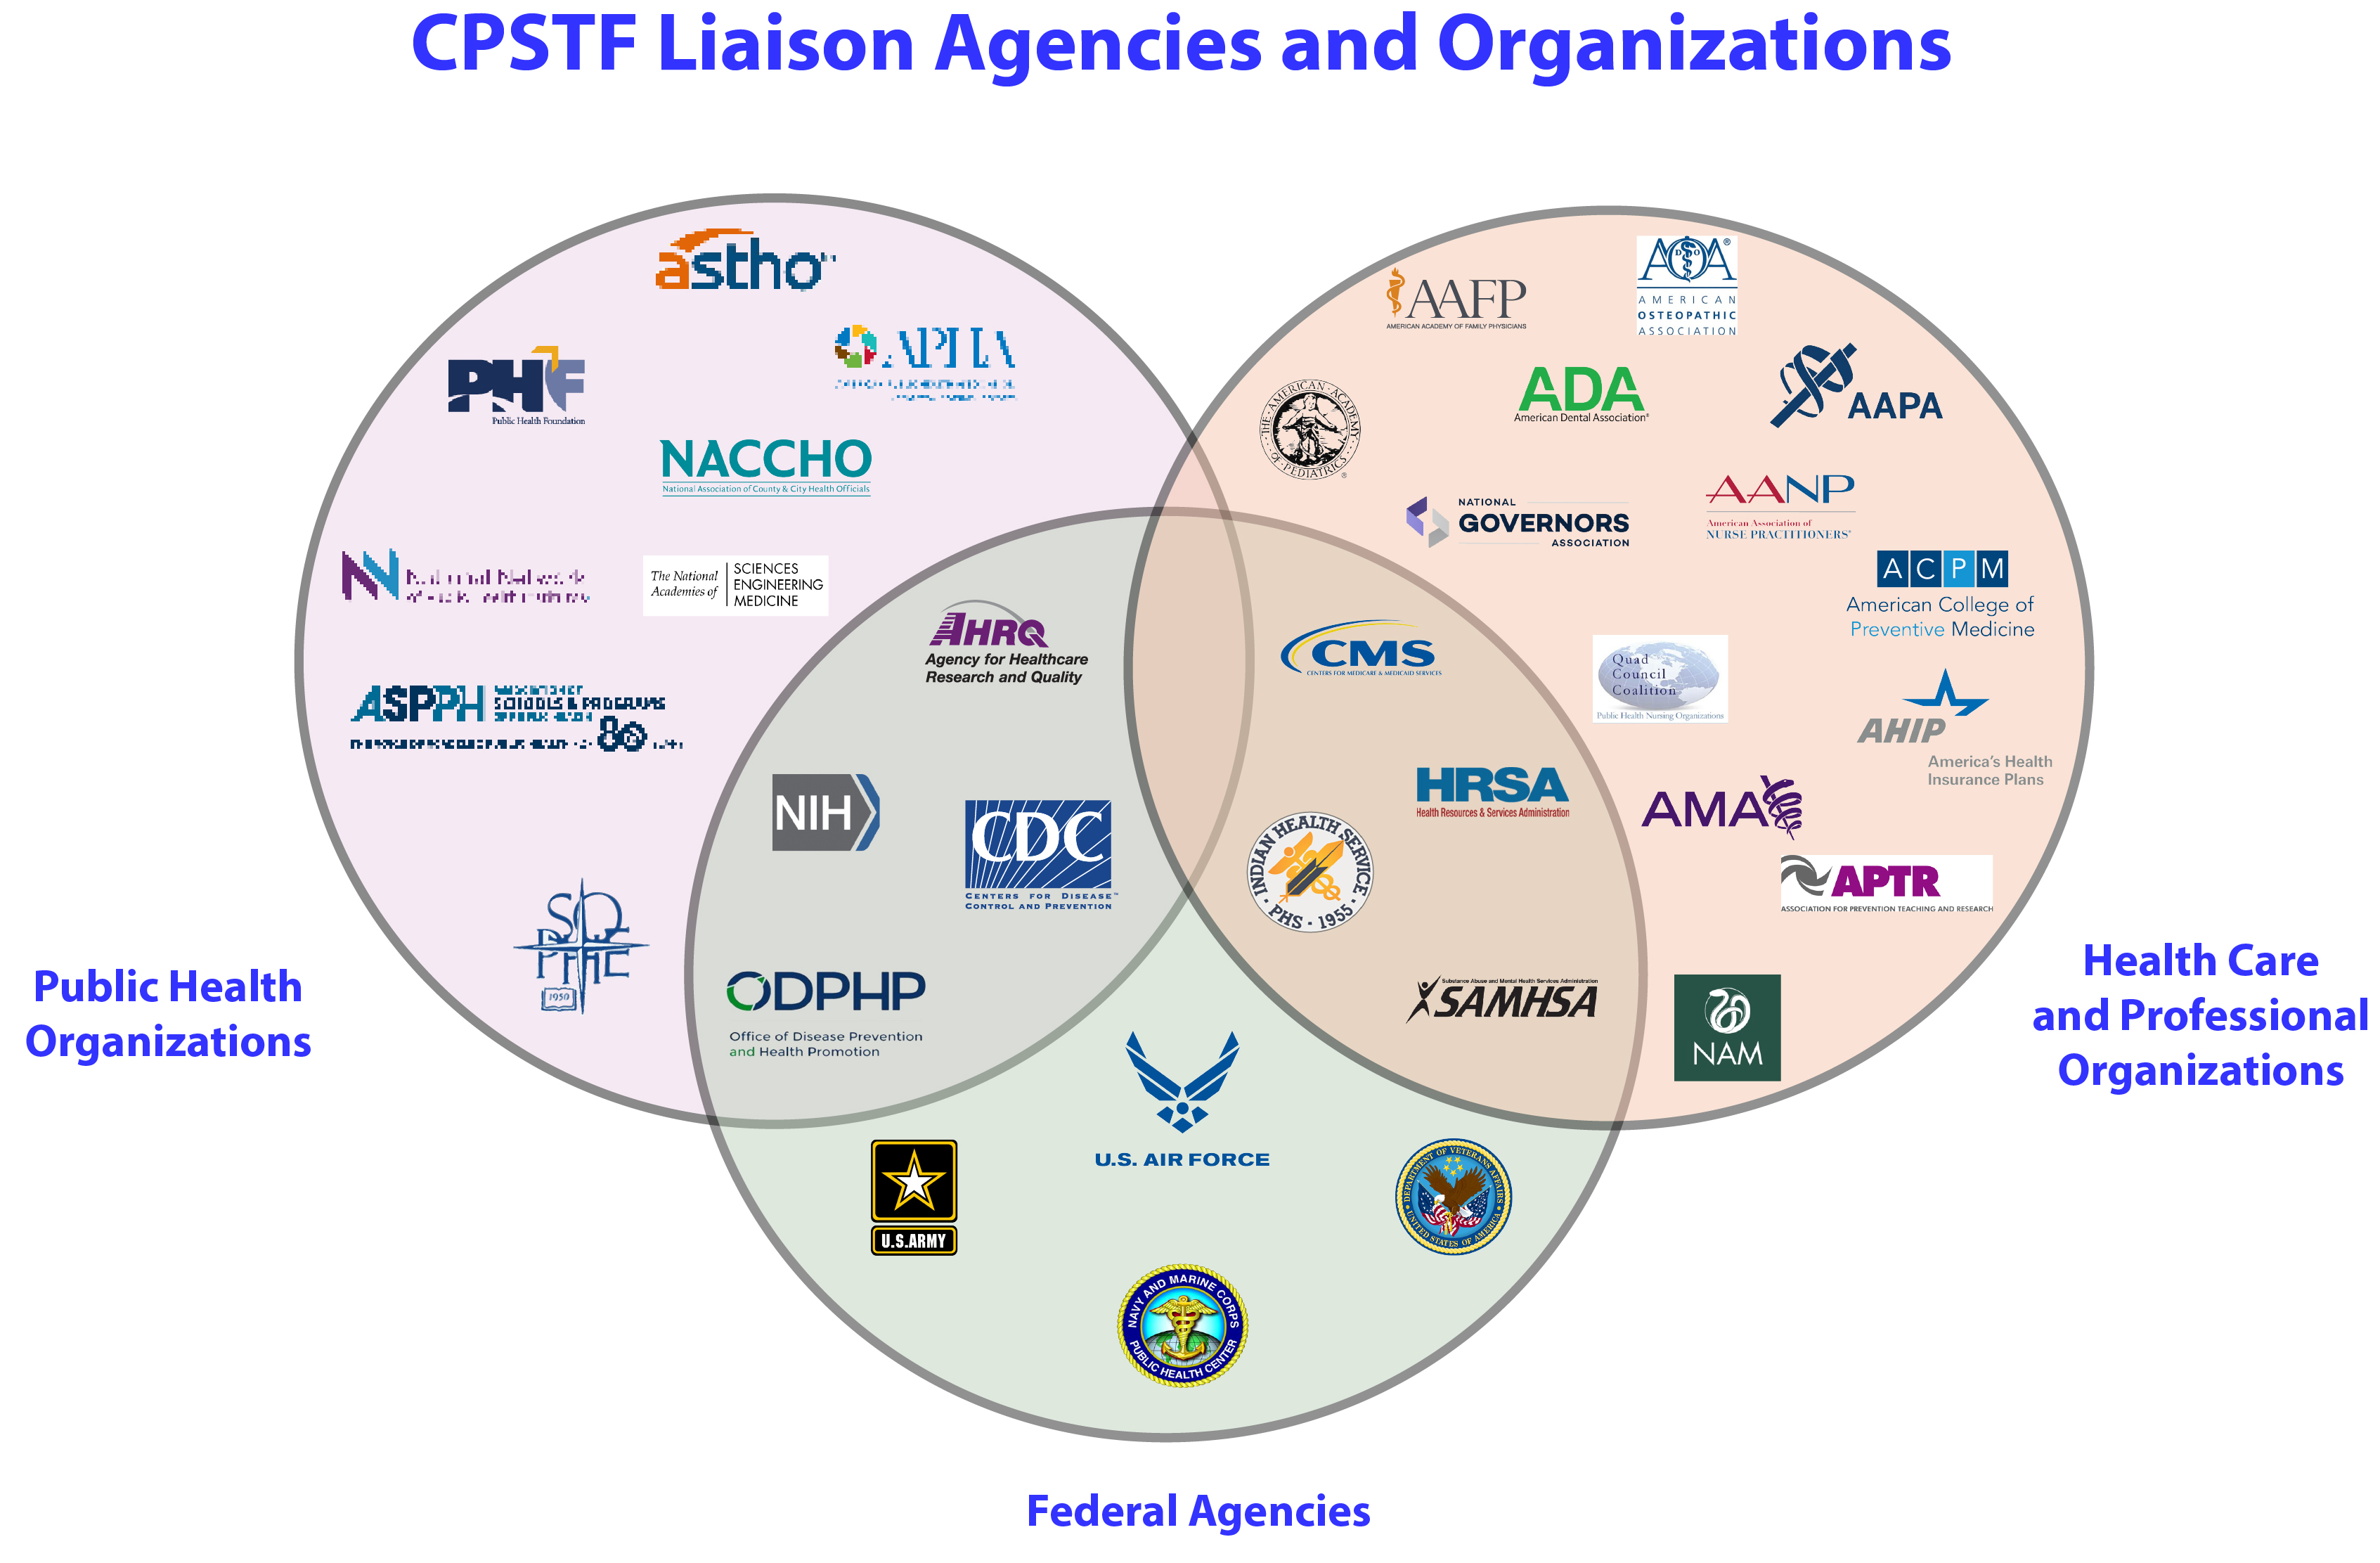 A Venn diagram showing the three types of liaisons to the CPSTF